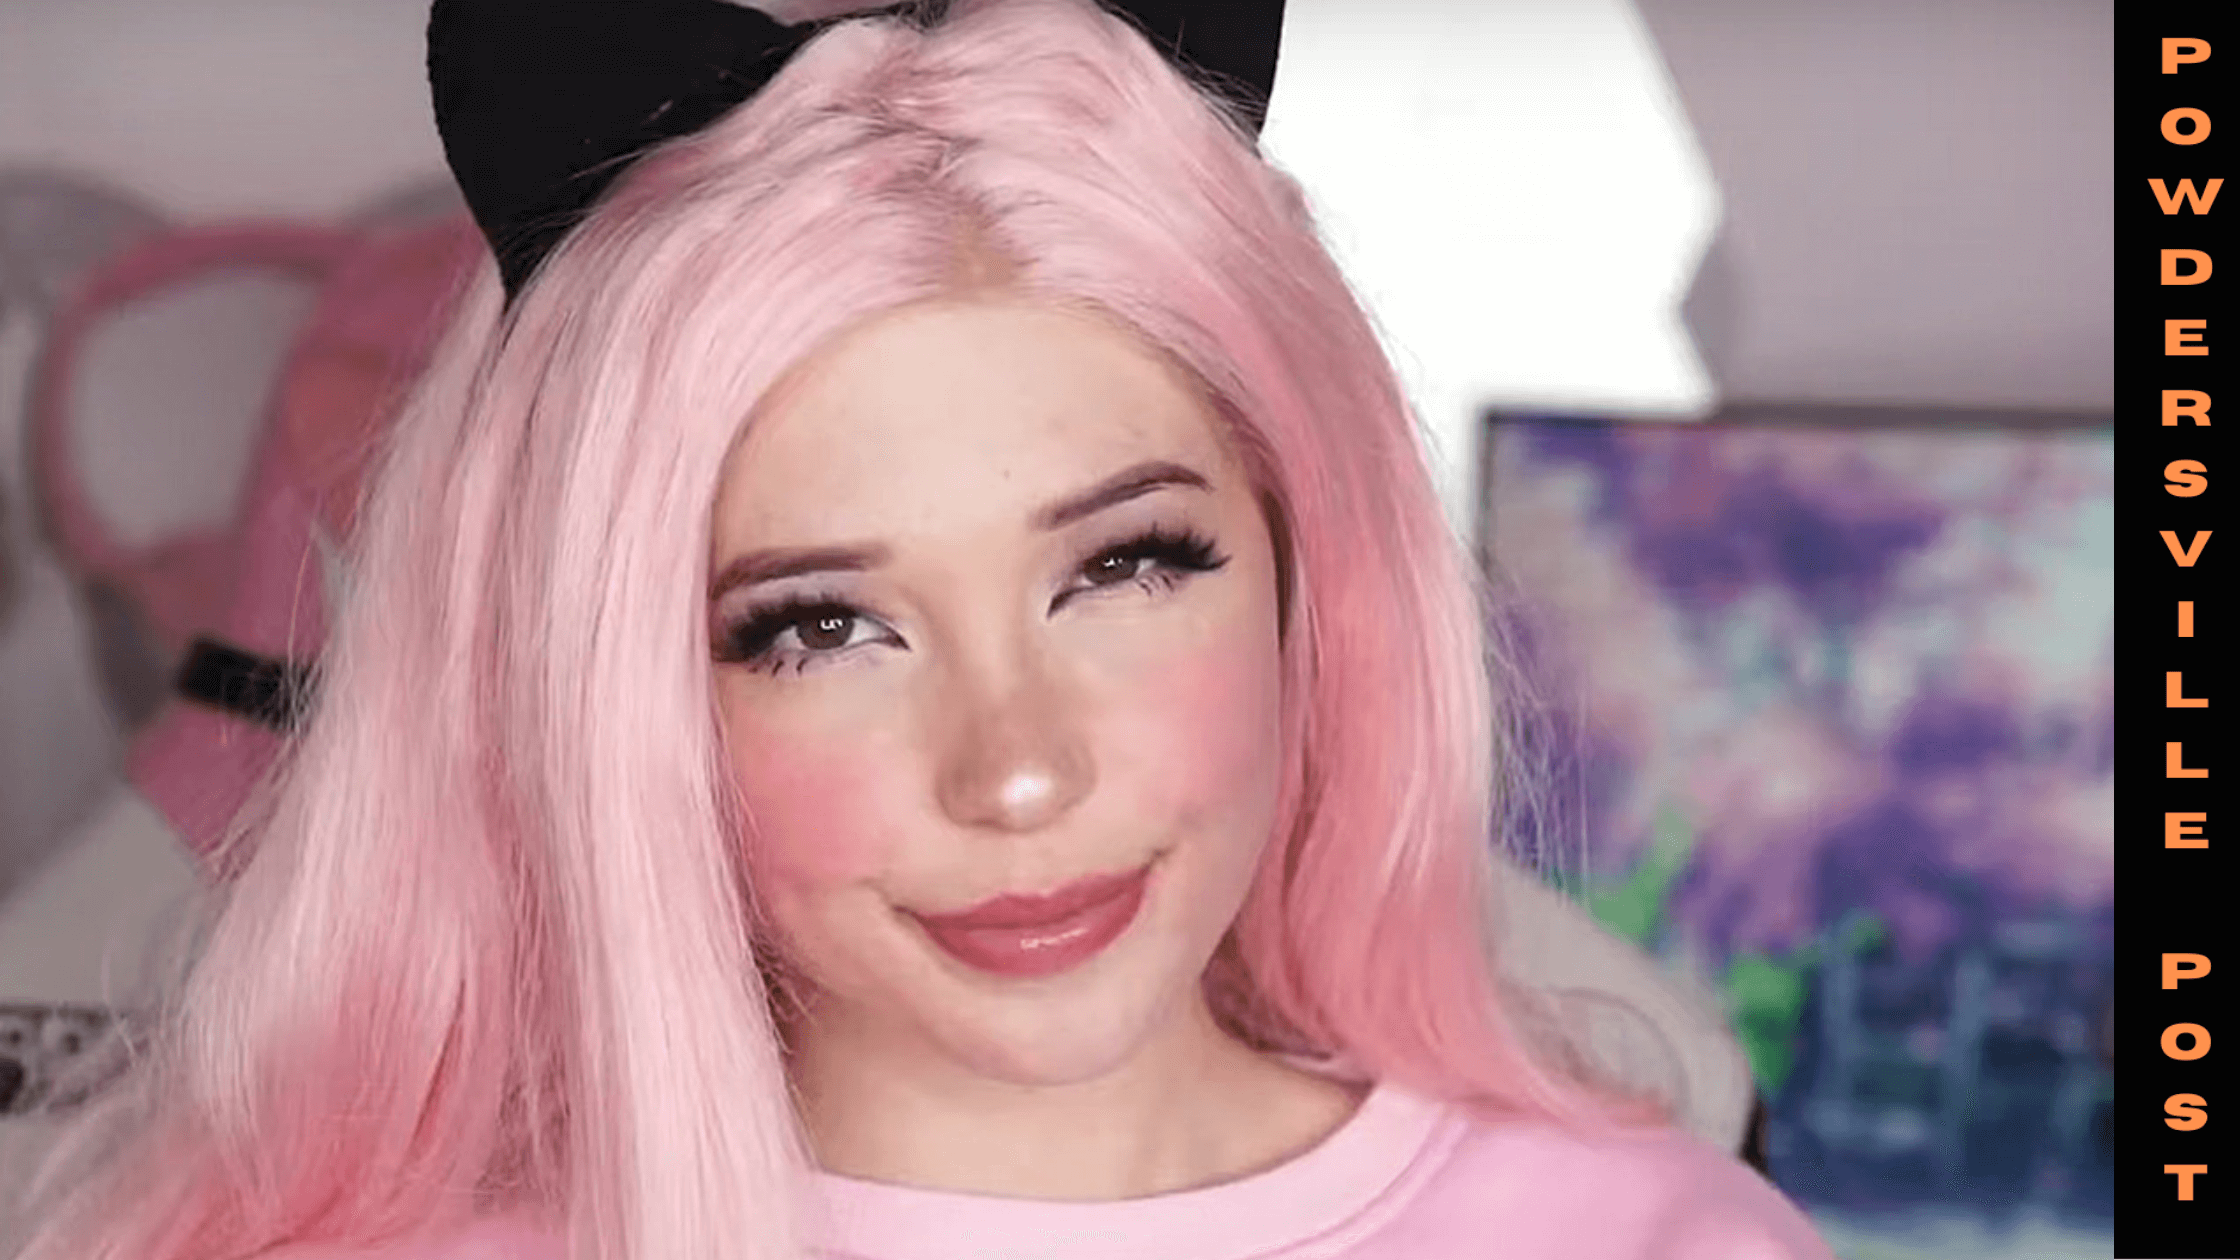 Belle Delphine Banned From Instagram. What Happened To Belle Delphine Details About Her Arrest And Social Media Ban